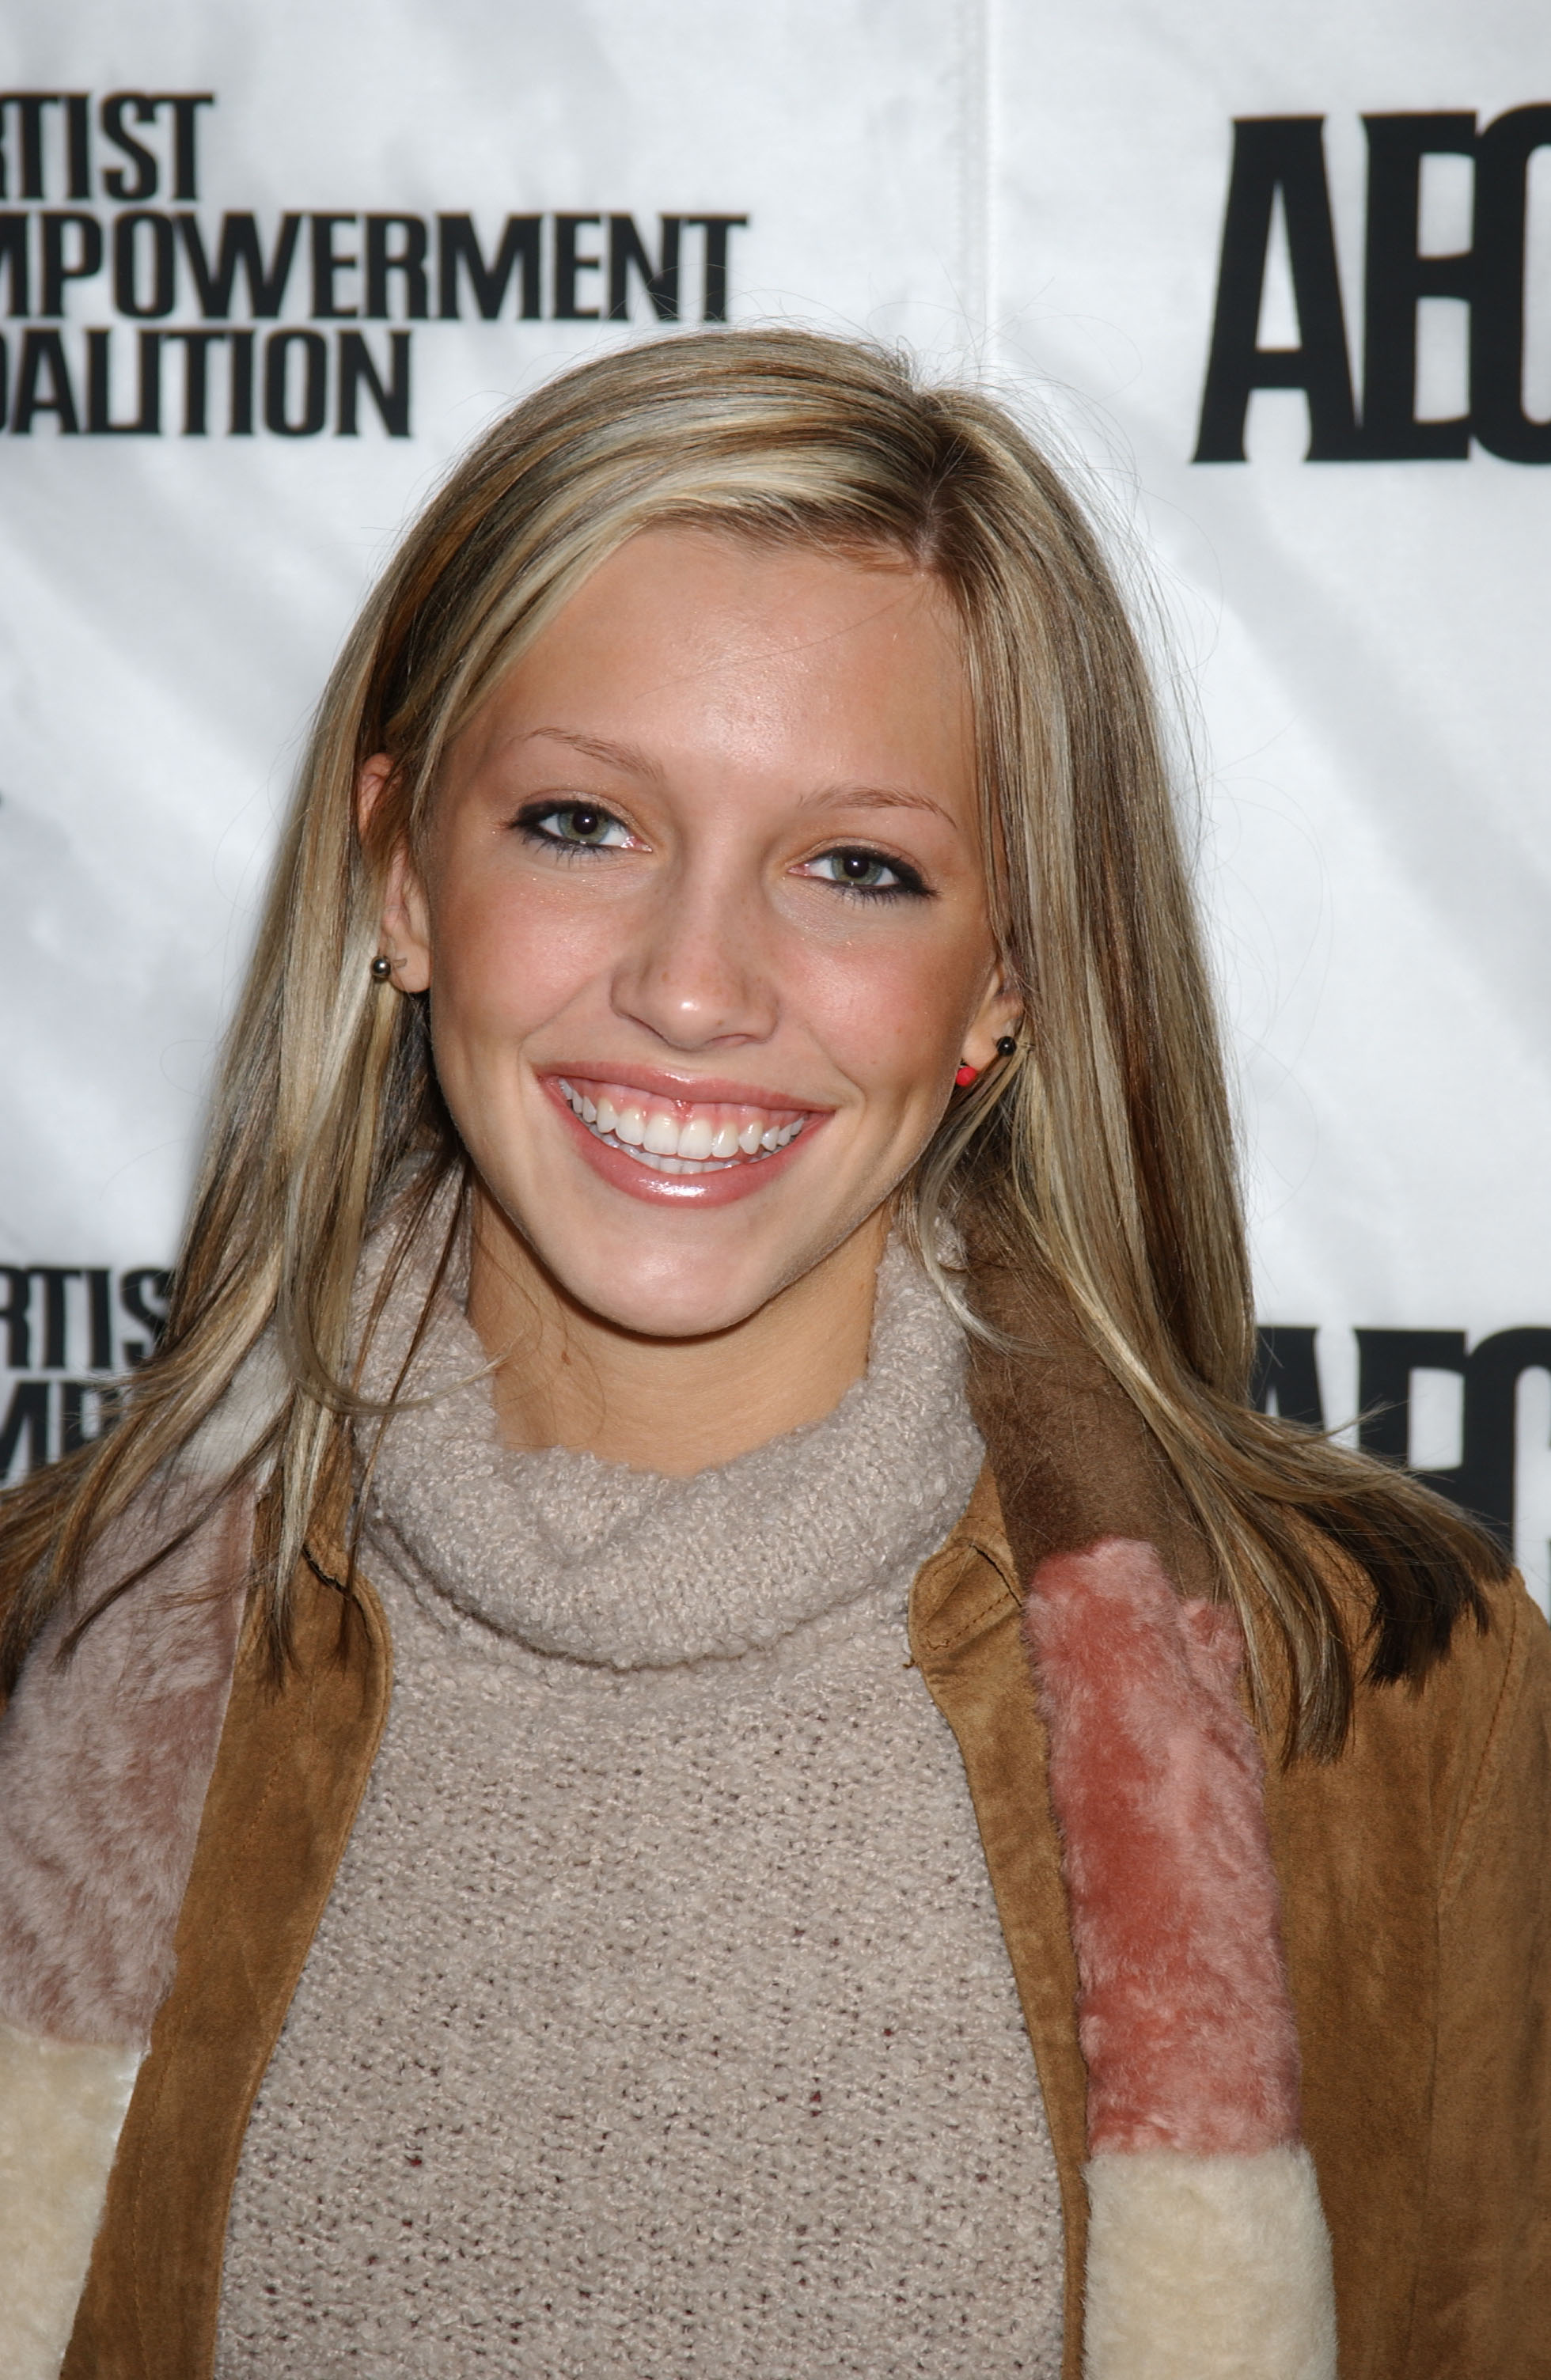 Katie Cassidy on February 23, 2003 in New York. | Source: Getty Images